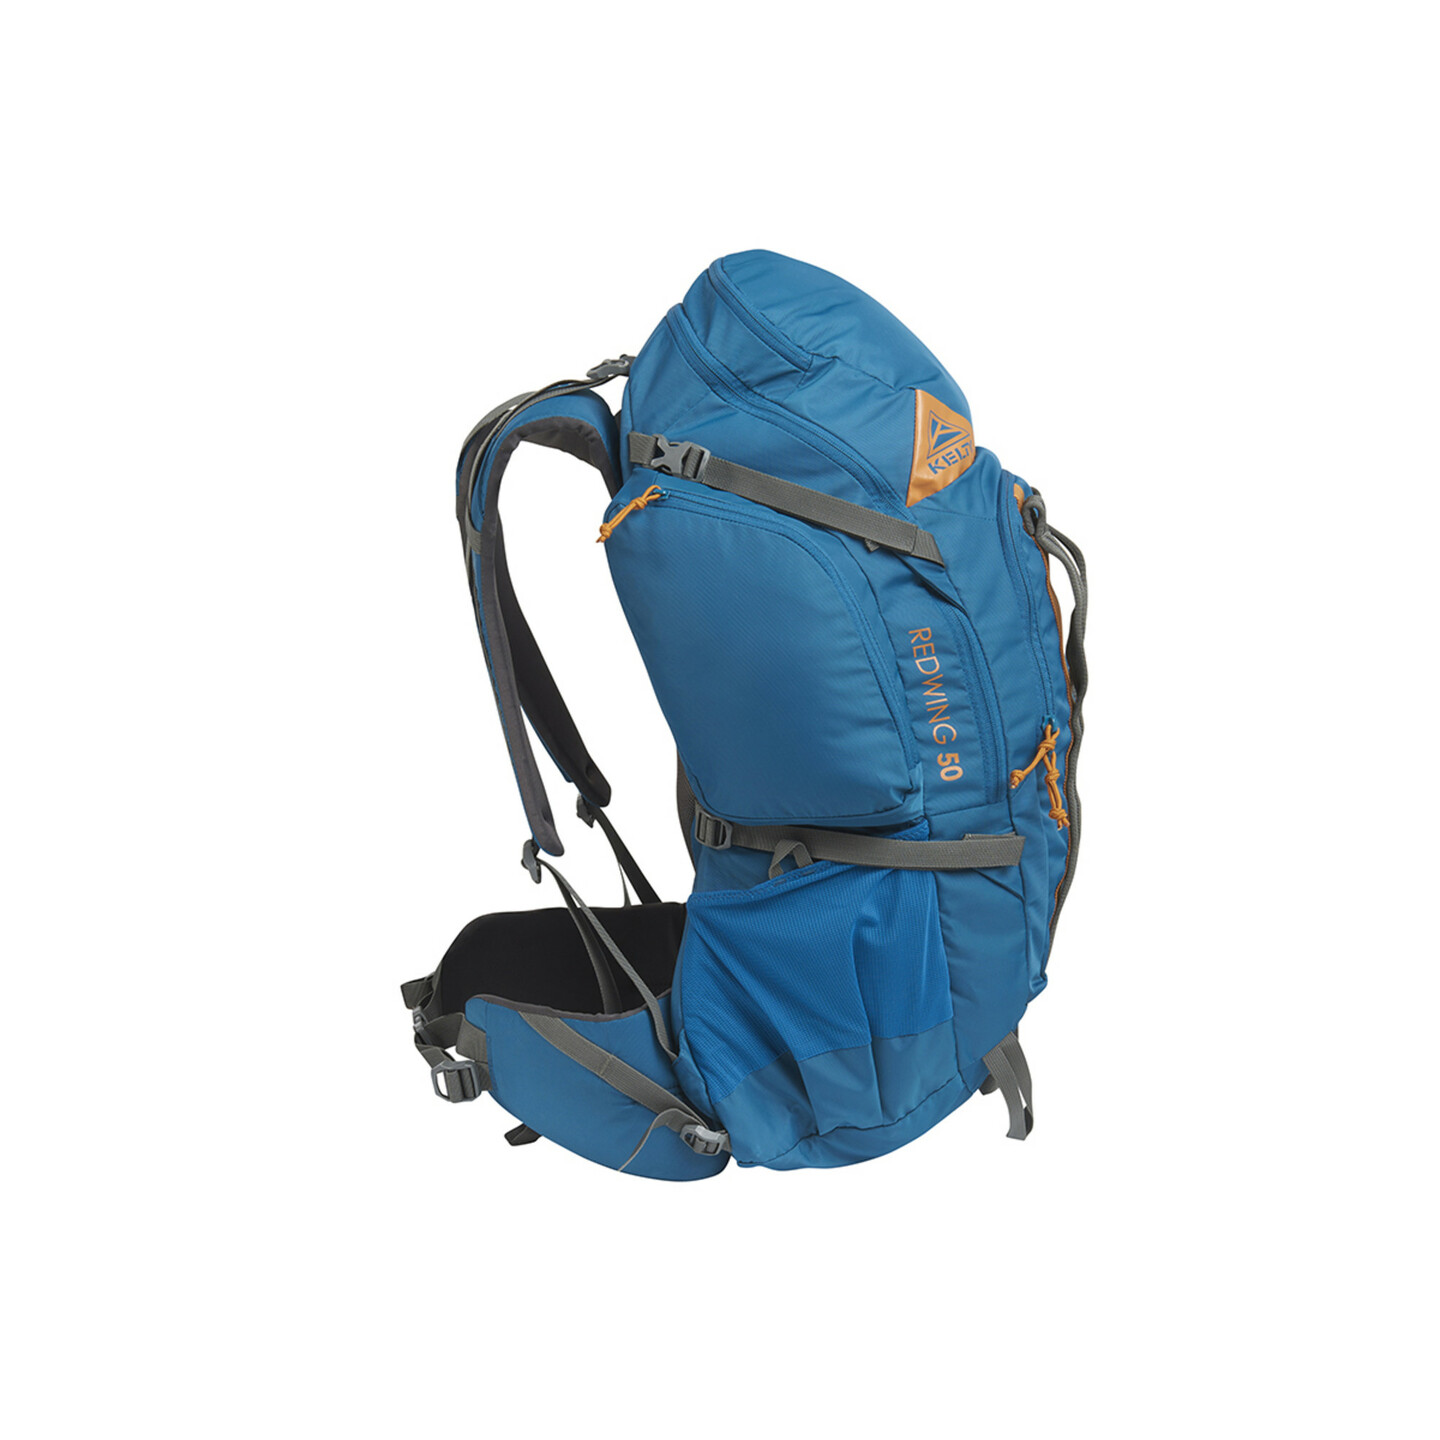 Kelty Redwing 50 Trail Pack